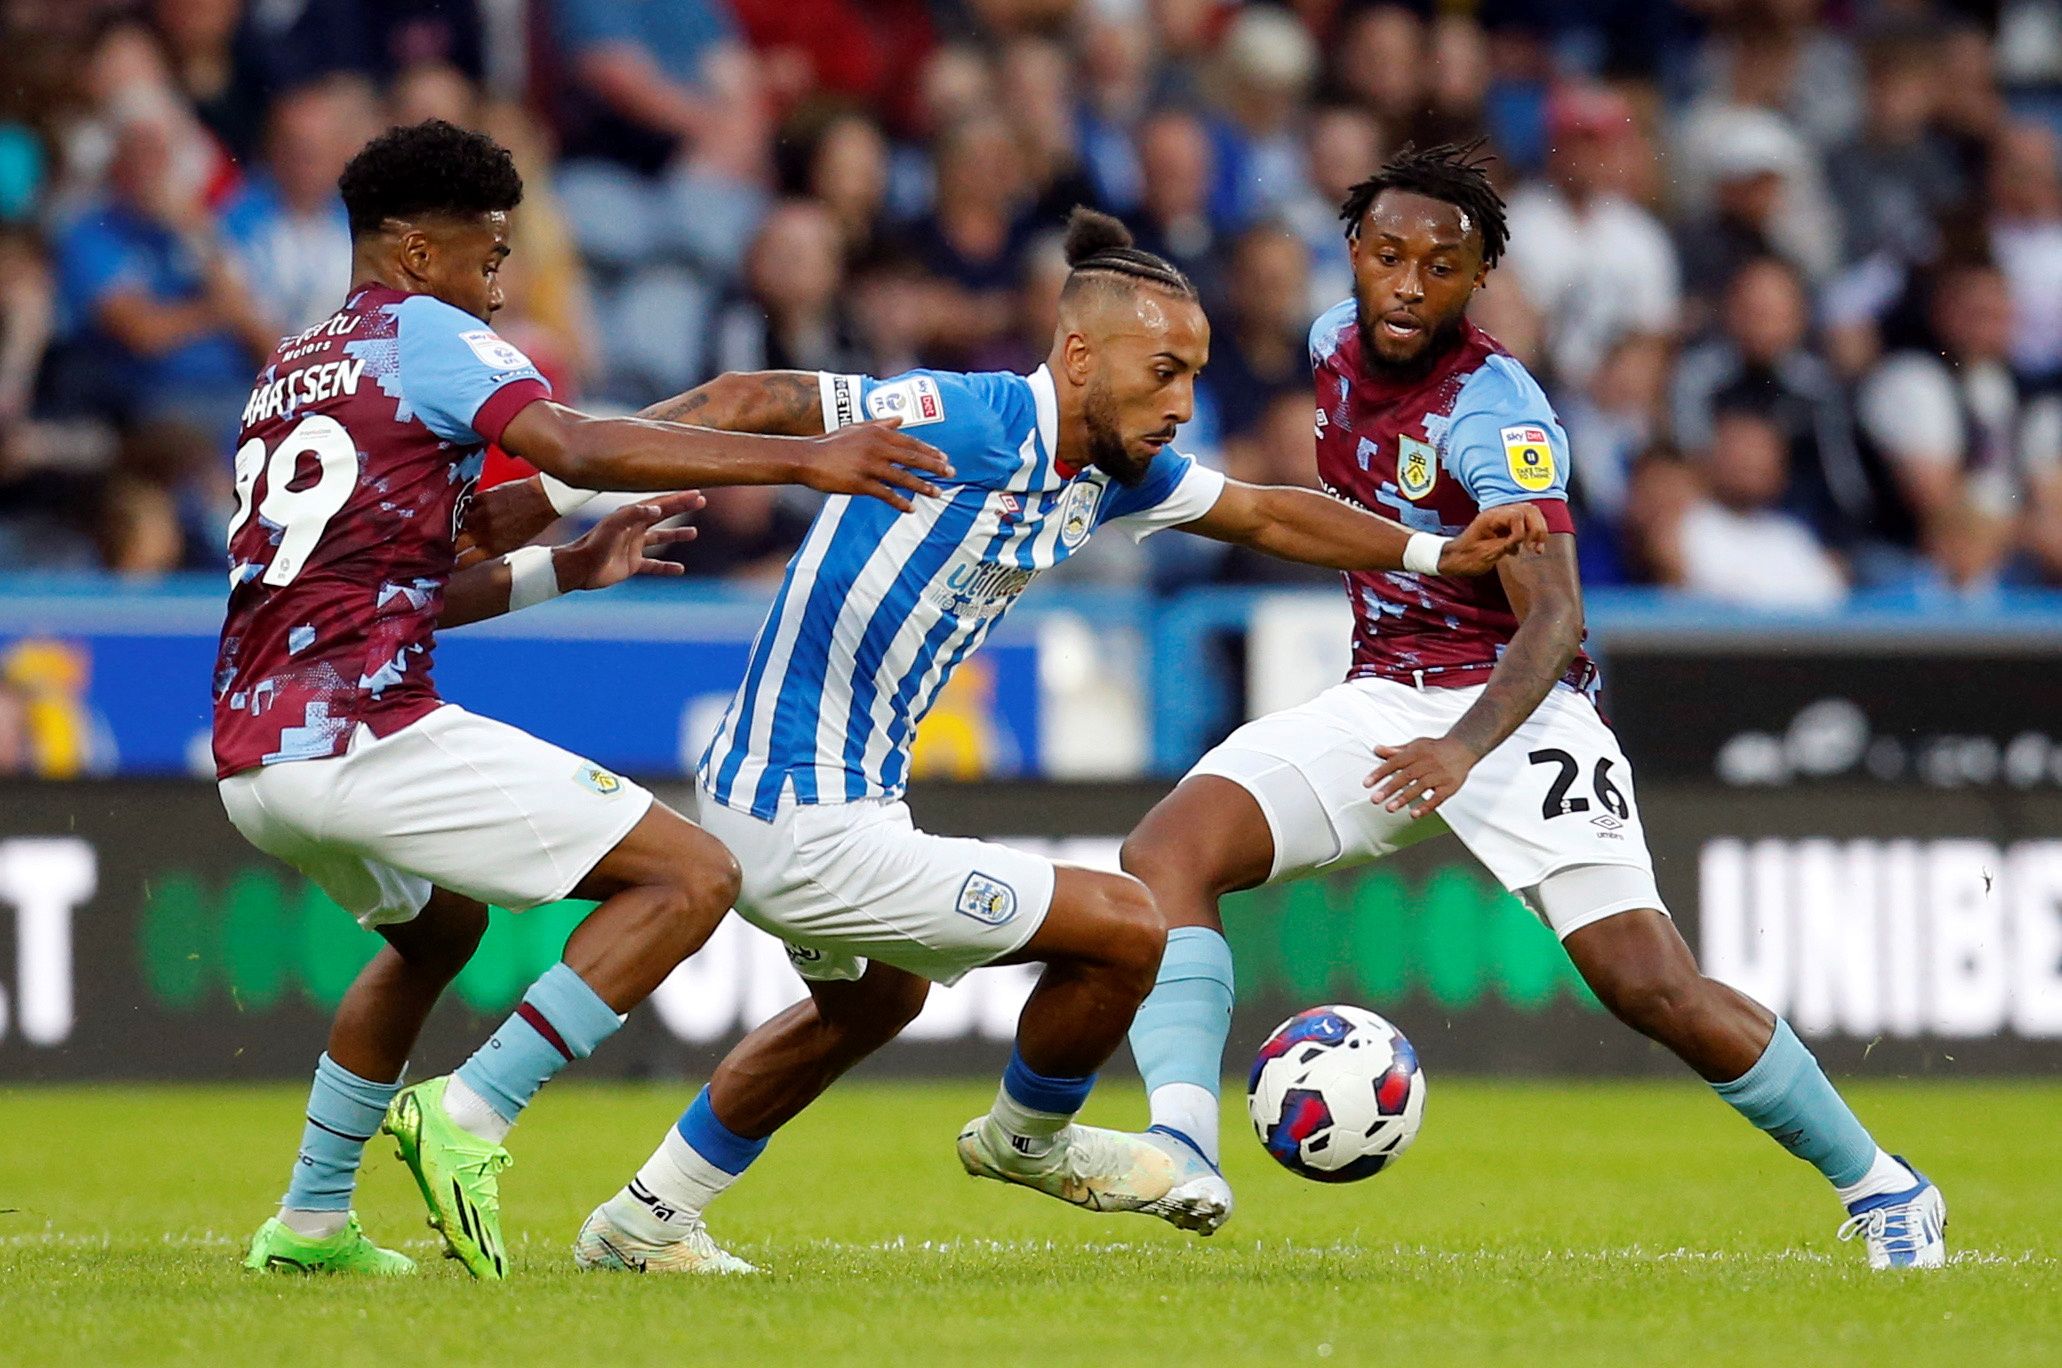 Soccer Football - Championship - Huddersfield Town v Burnley - John Smith's Stadium, Huddersfield, Britain - July 29, 2022  Huddersfield Town's Sorba Thomas in action with Burnley's Ian Maatsen and Samuel Bastien  Action Images/Ed Sykes  EDITORIAL USE ONLY. No use with unauthorized audio, video, data, fixture lists, club/league logos or 